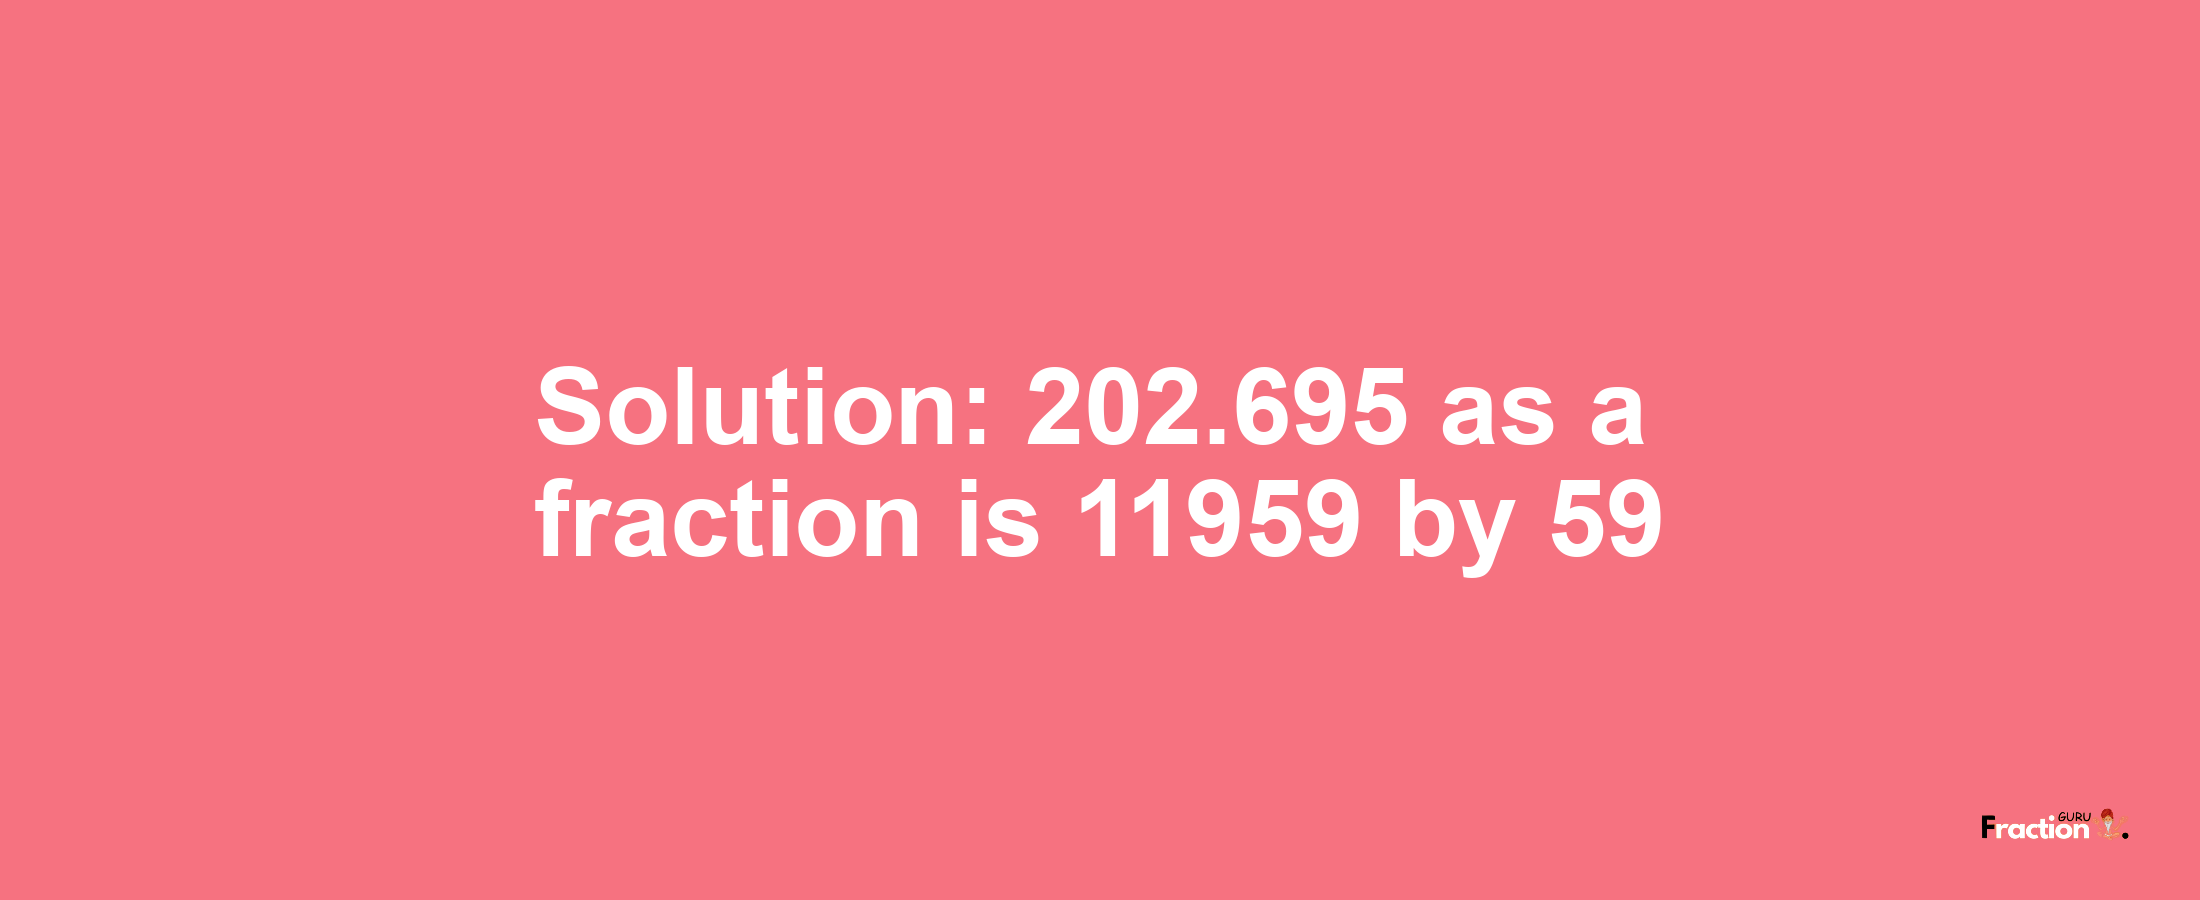 Solution:202.695 as a fraction is 11959/59